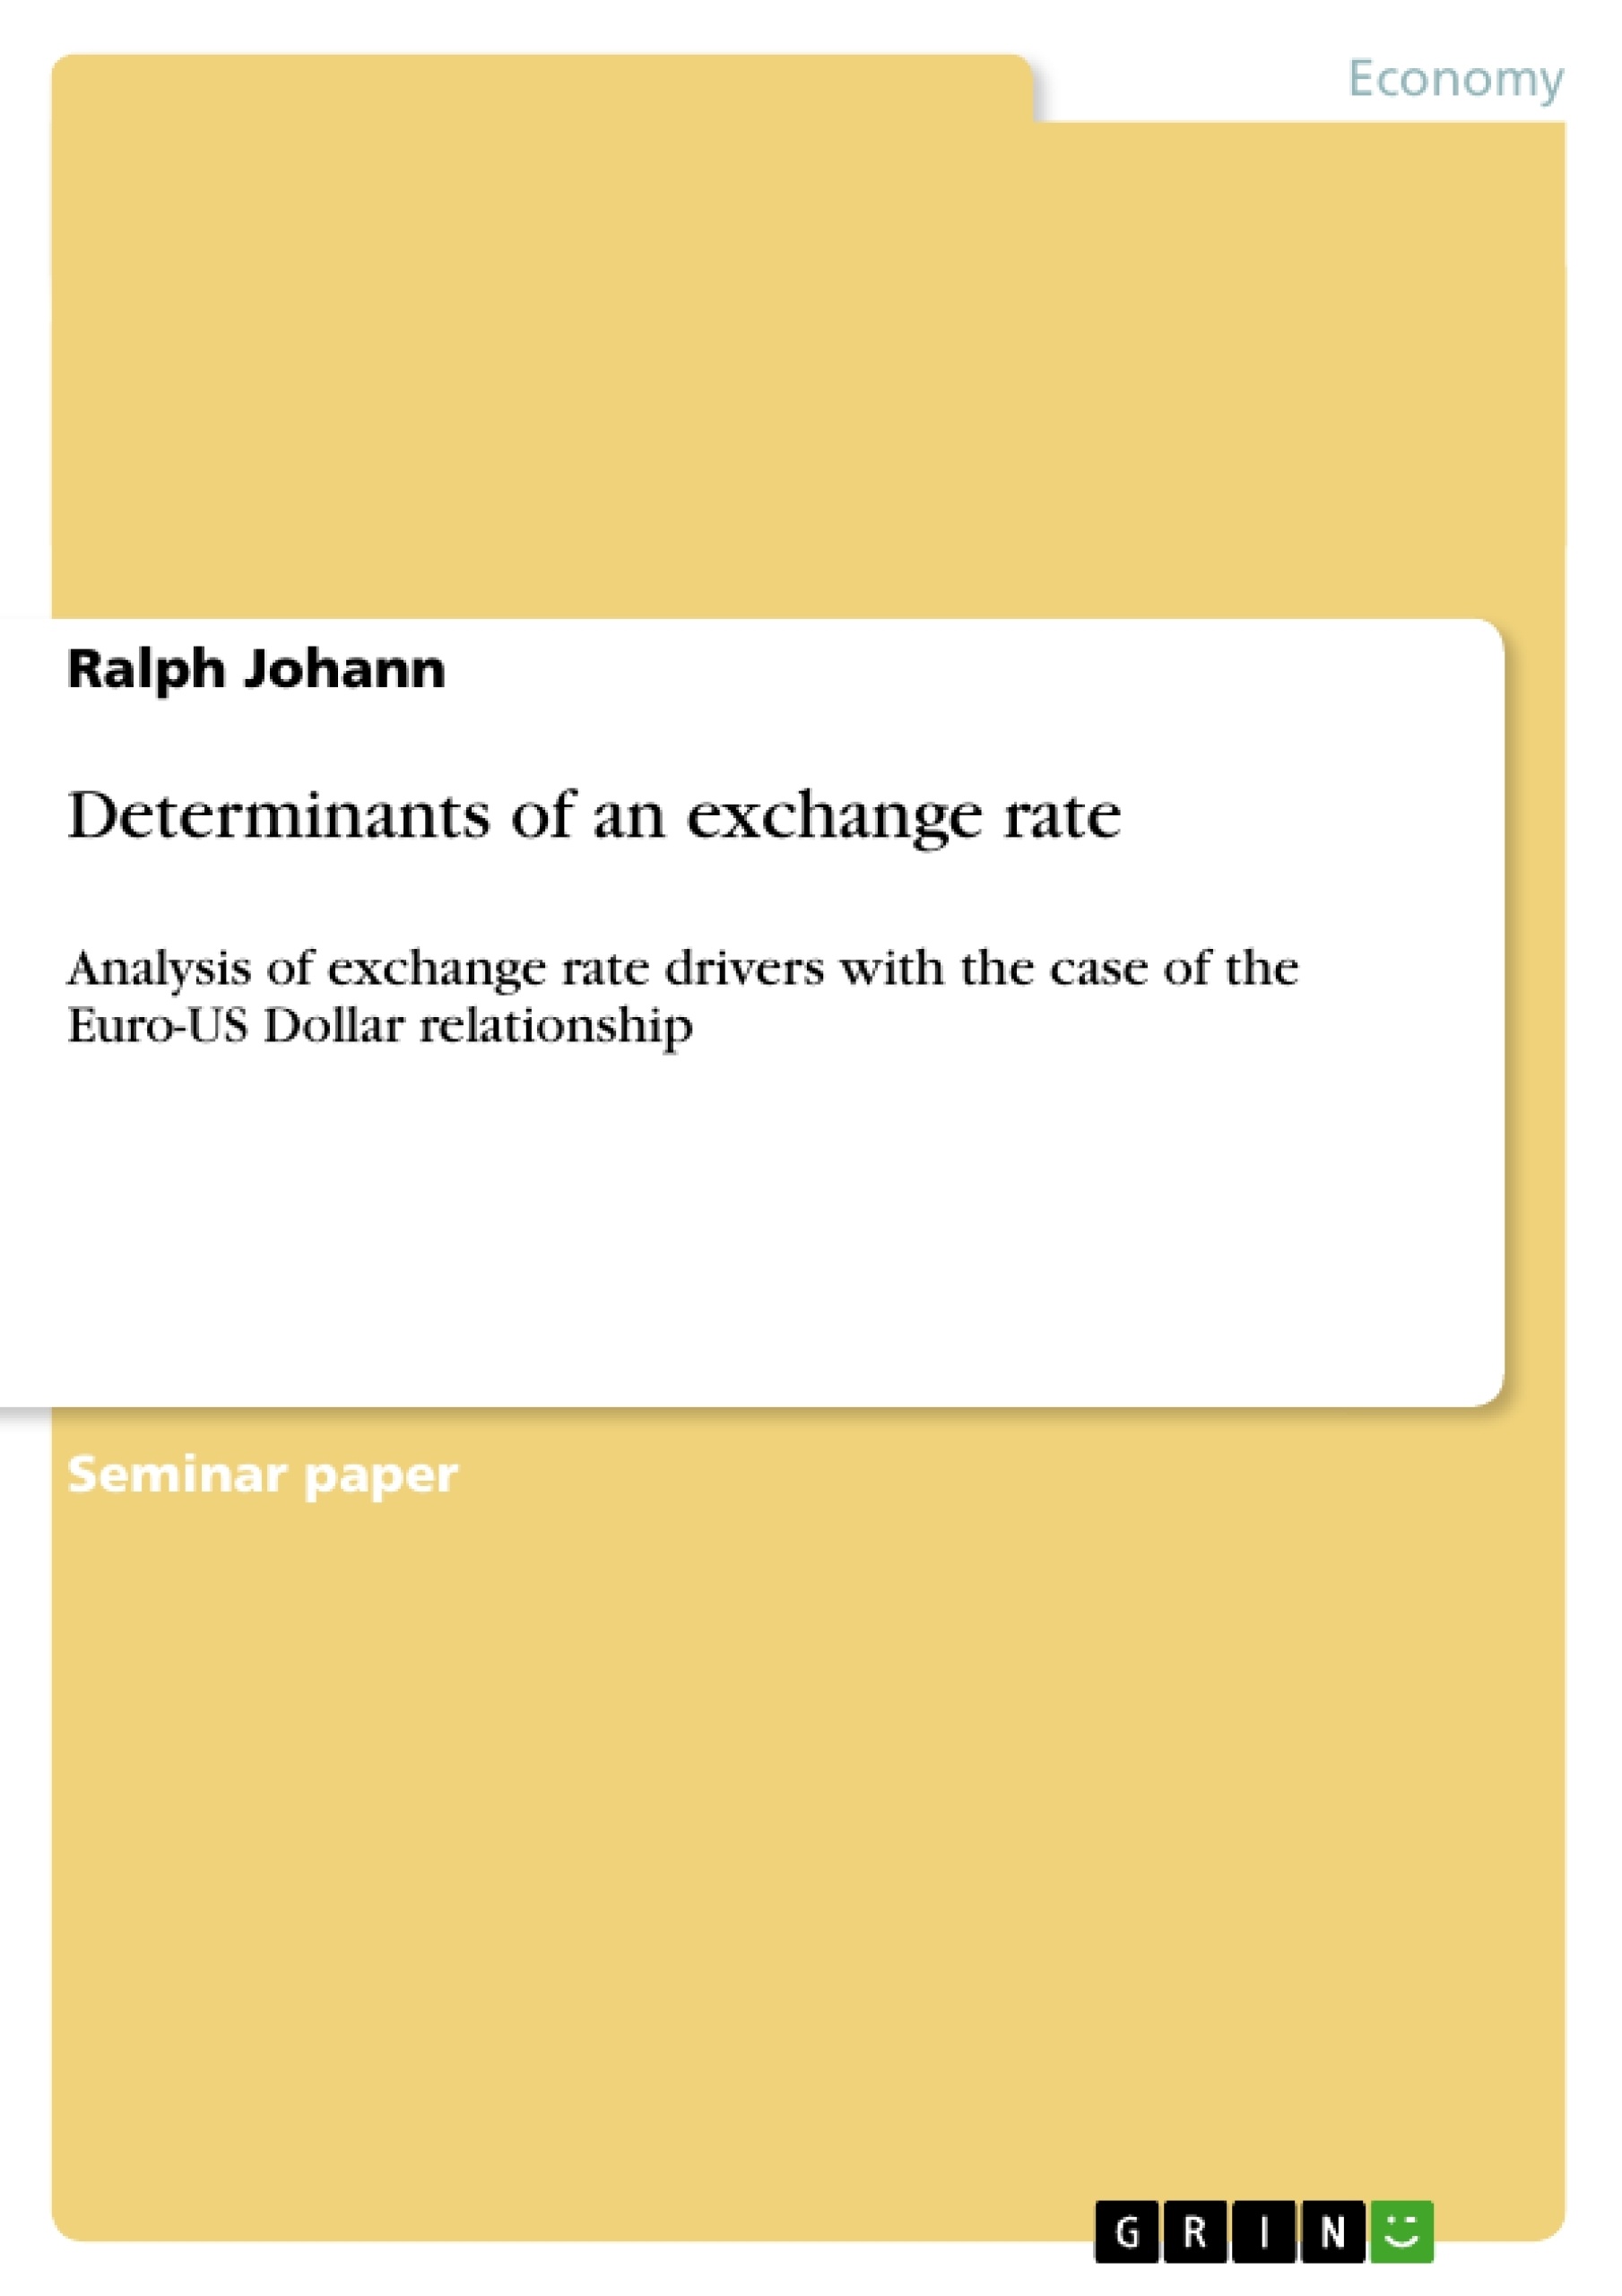 Title: Determinants of an exchange rate